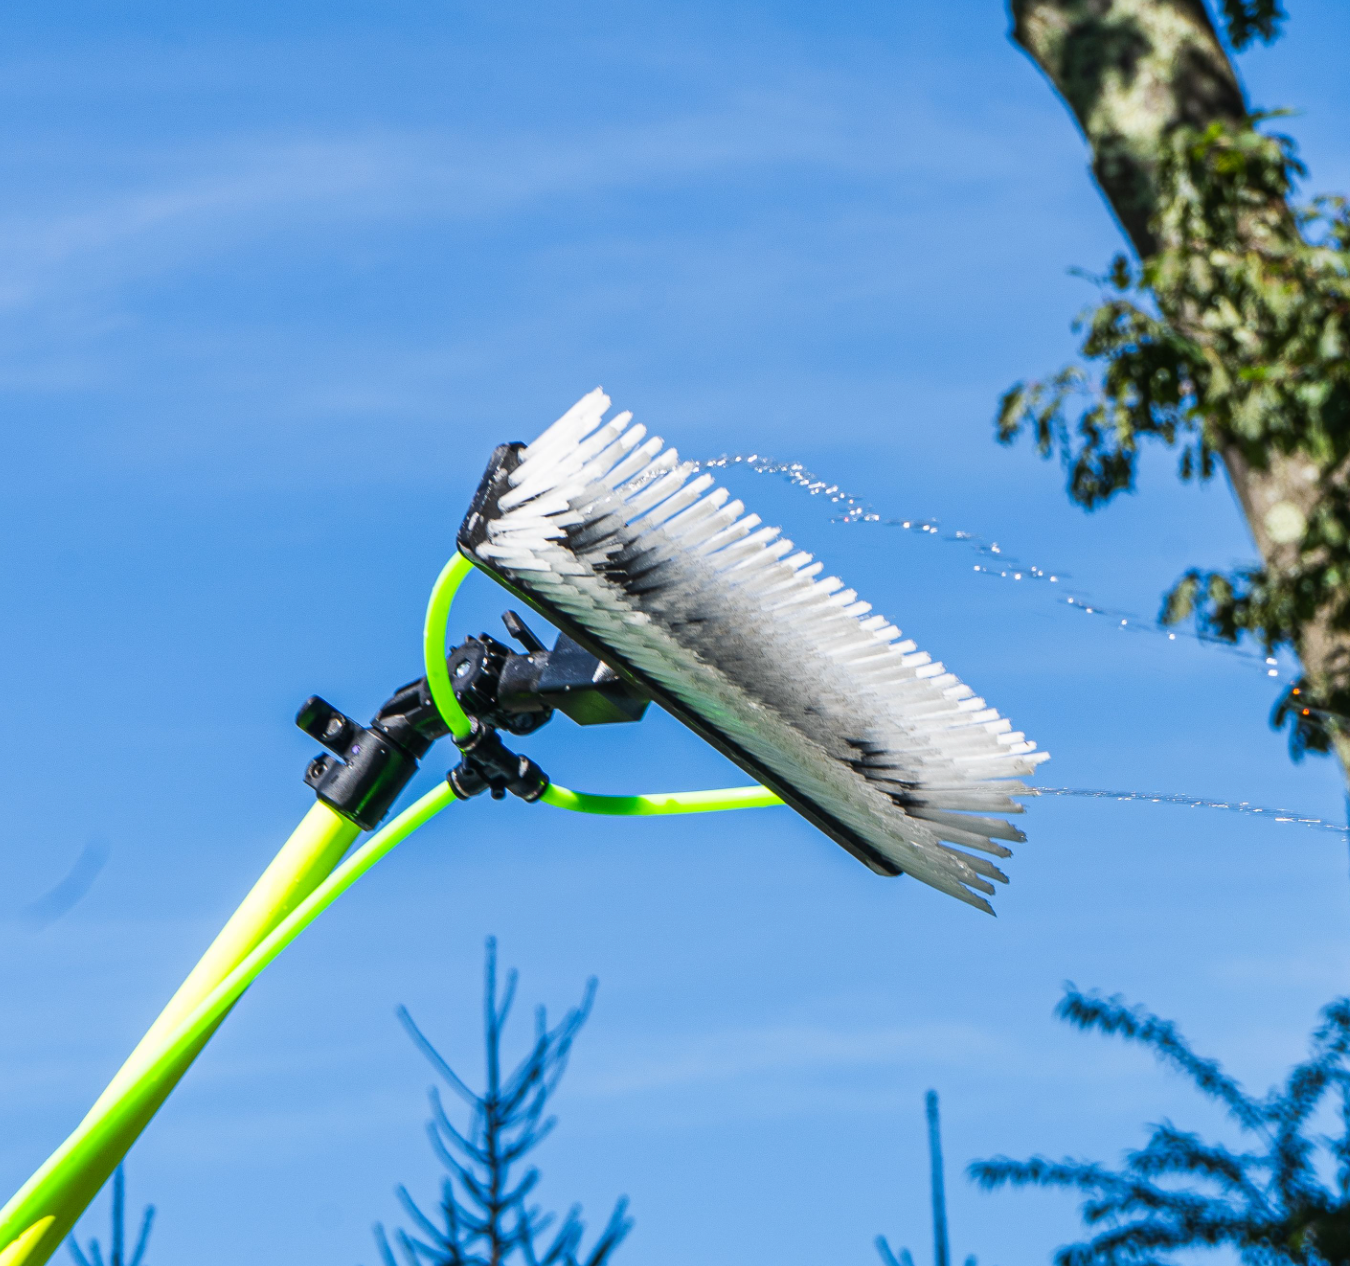 Window Cleaning Supplies & Water Fed Pole Equipment